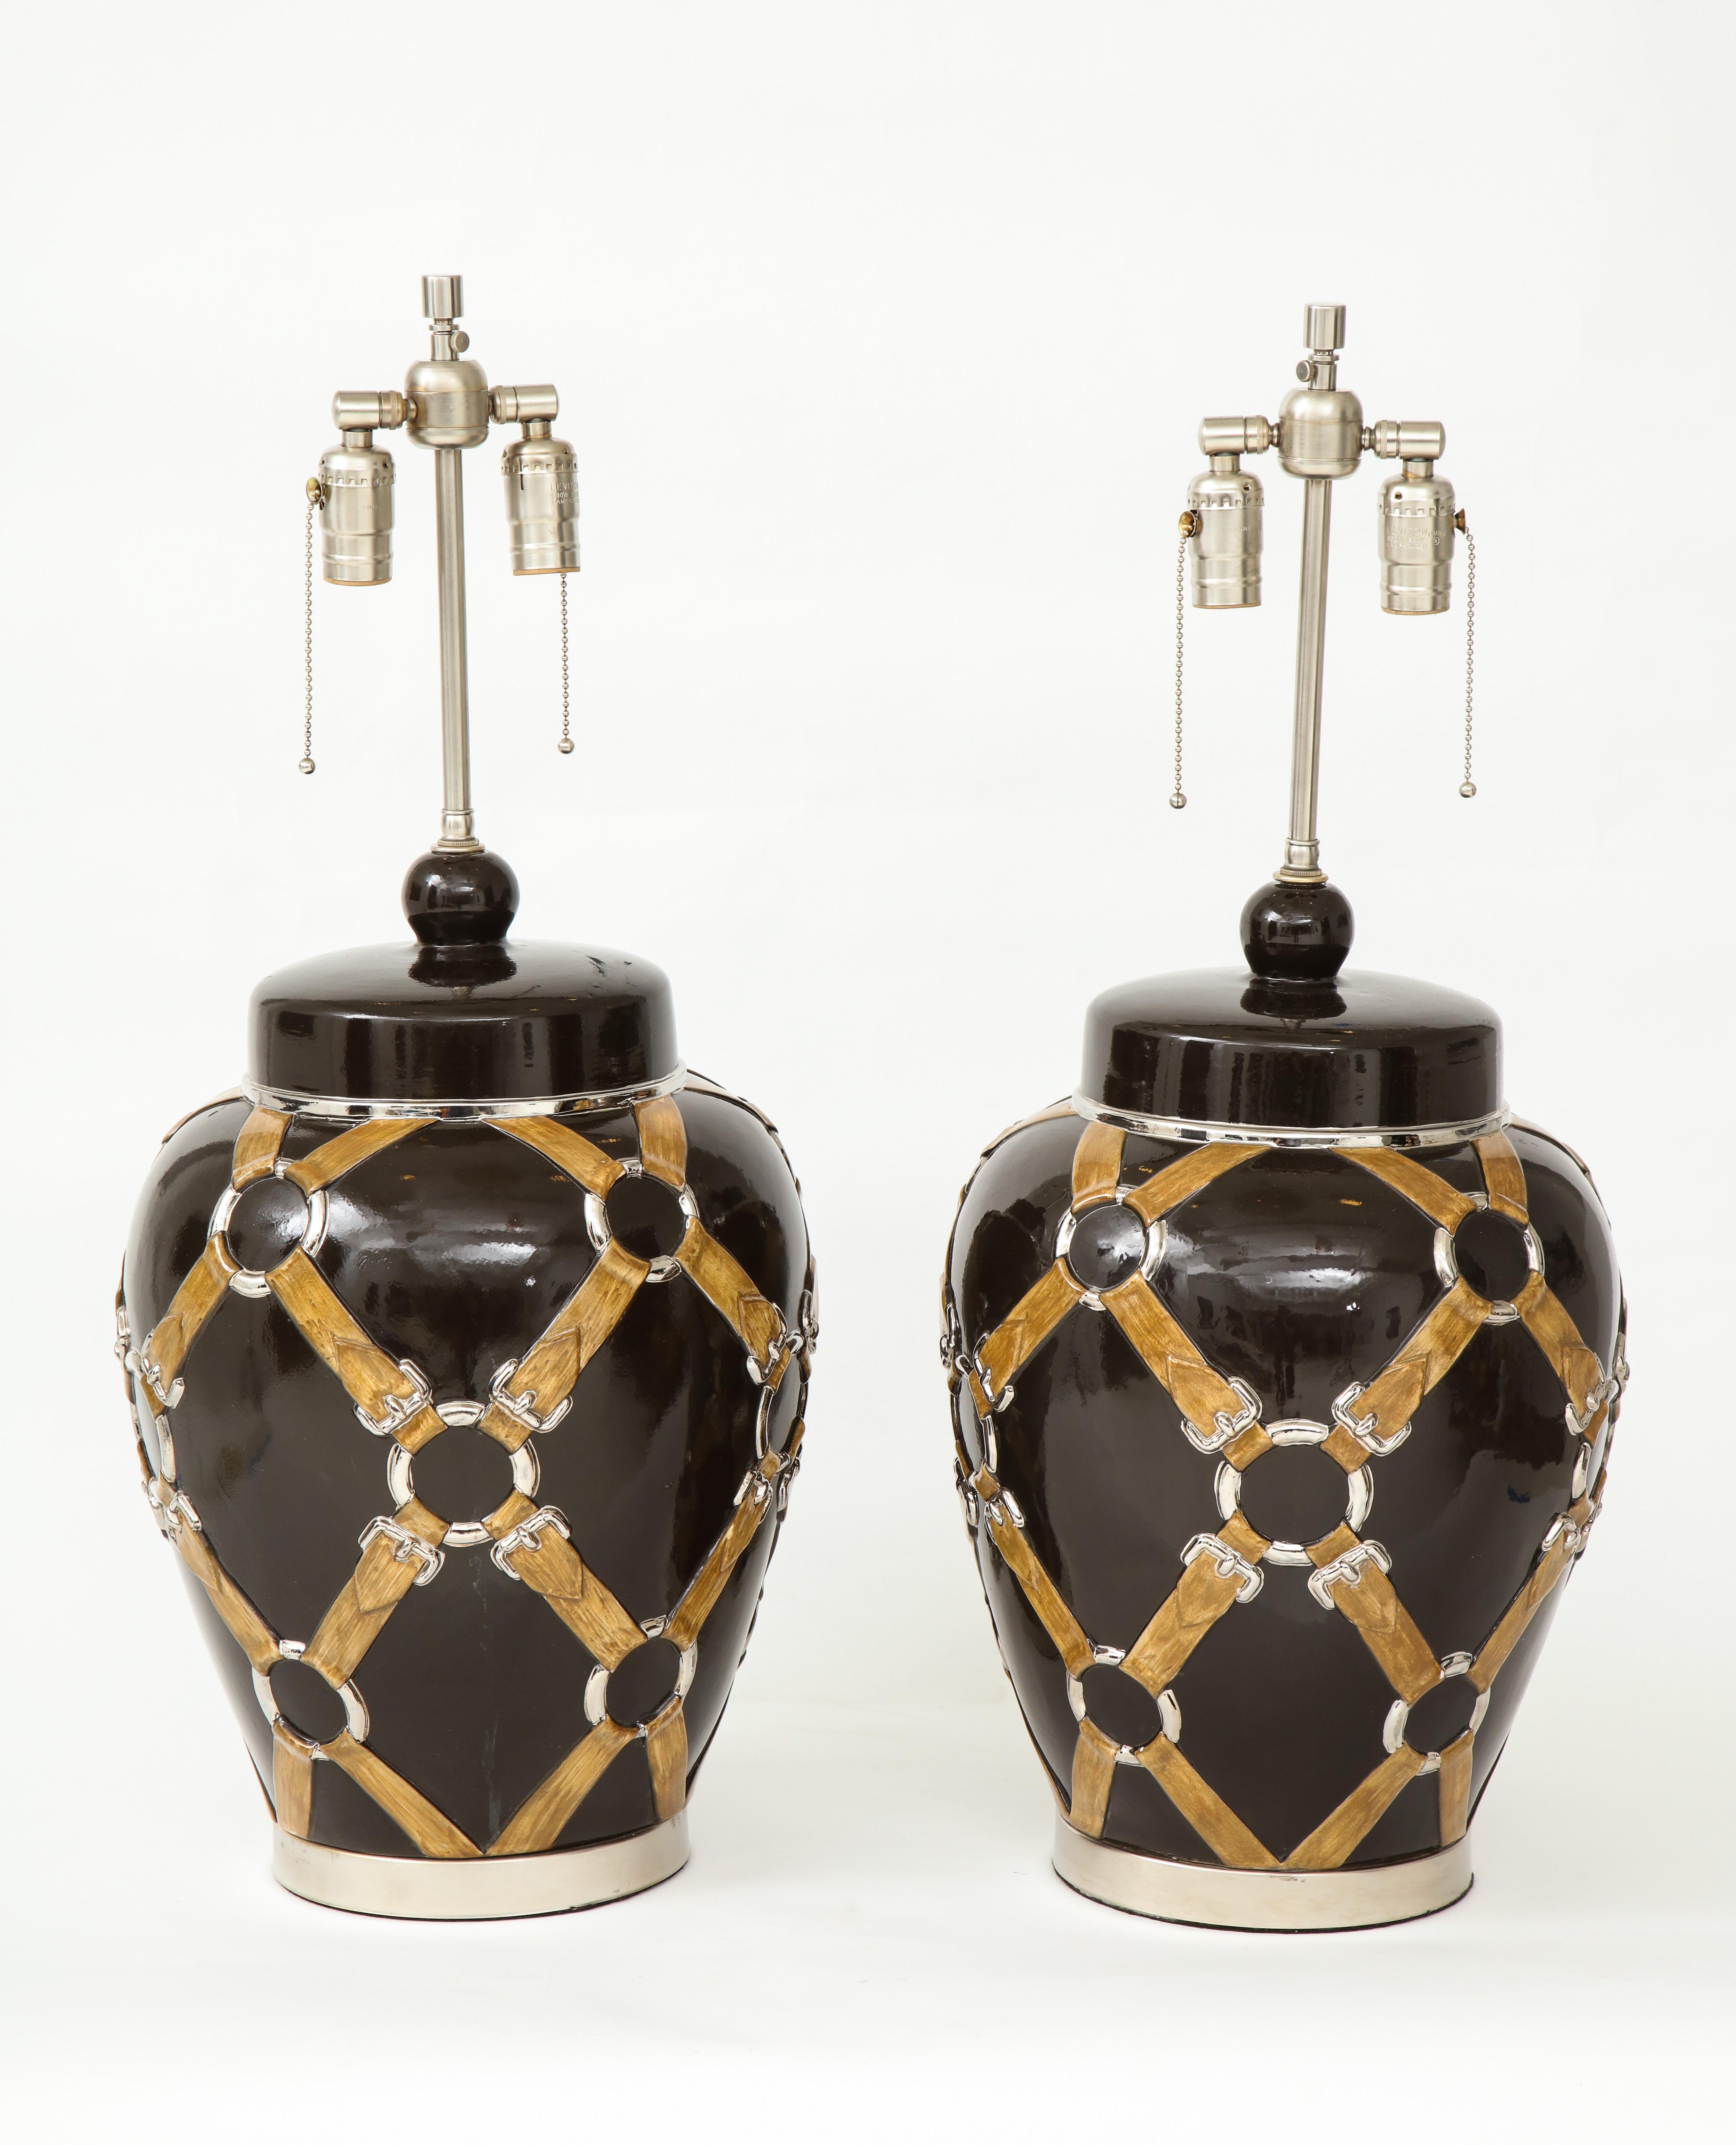 Exquisite pair of Gucci inspired brown glazed ceramic lamps with ginger jar shaped bodies with stylized straps and buckles sitting on brushed nickel bases. Rewired for use in USA. 100W max, unless LED bulbs.